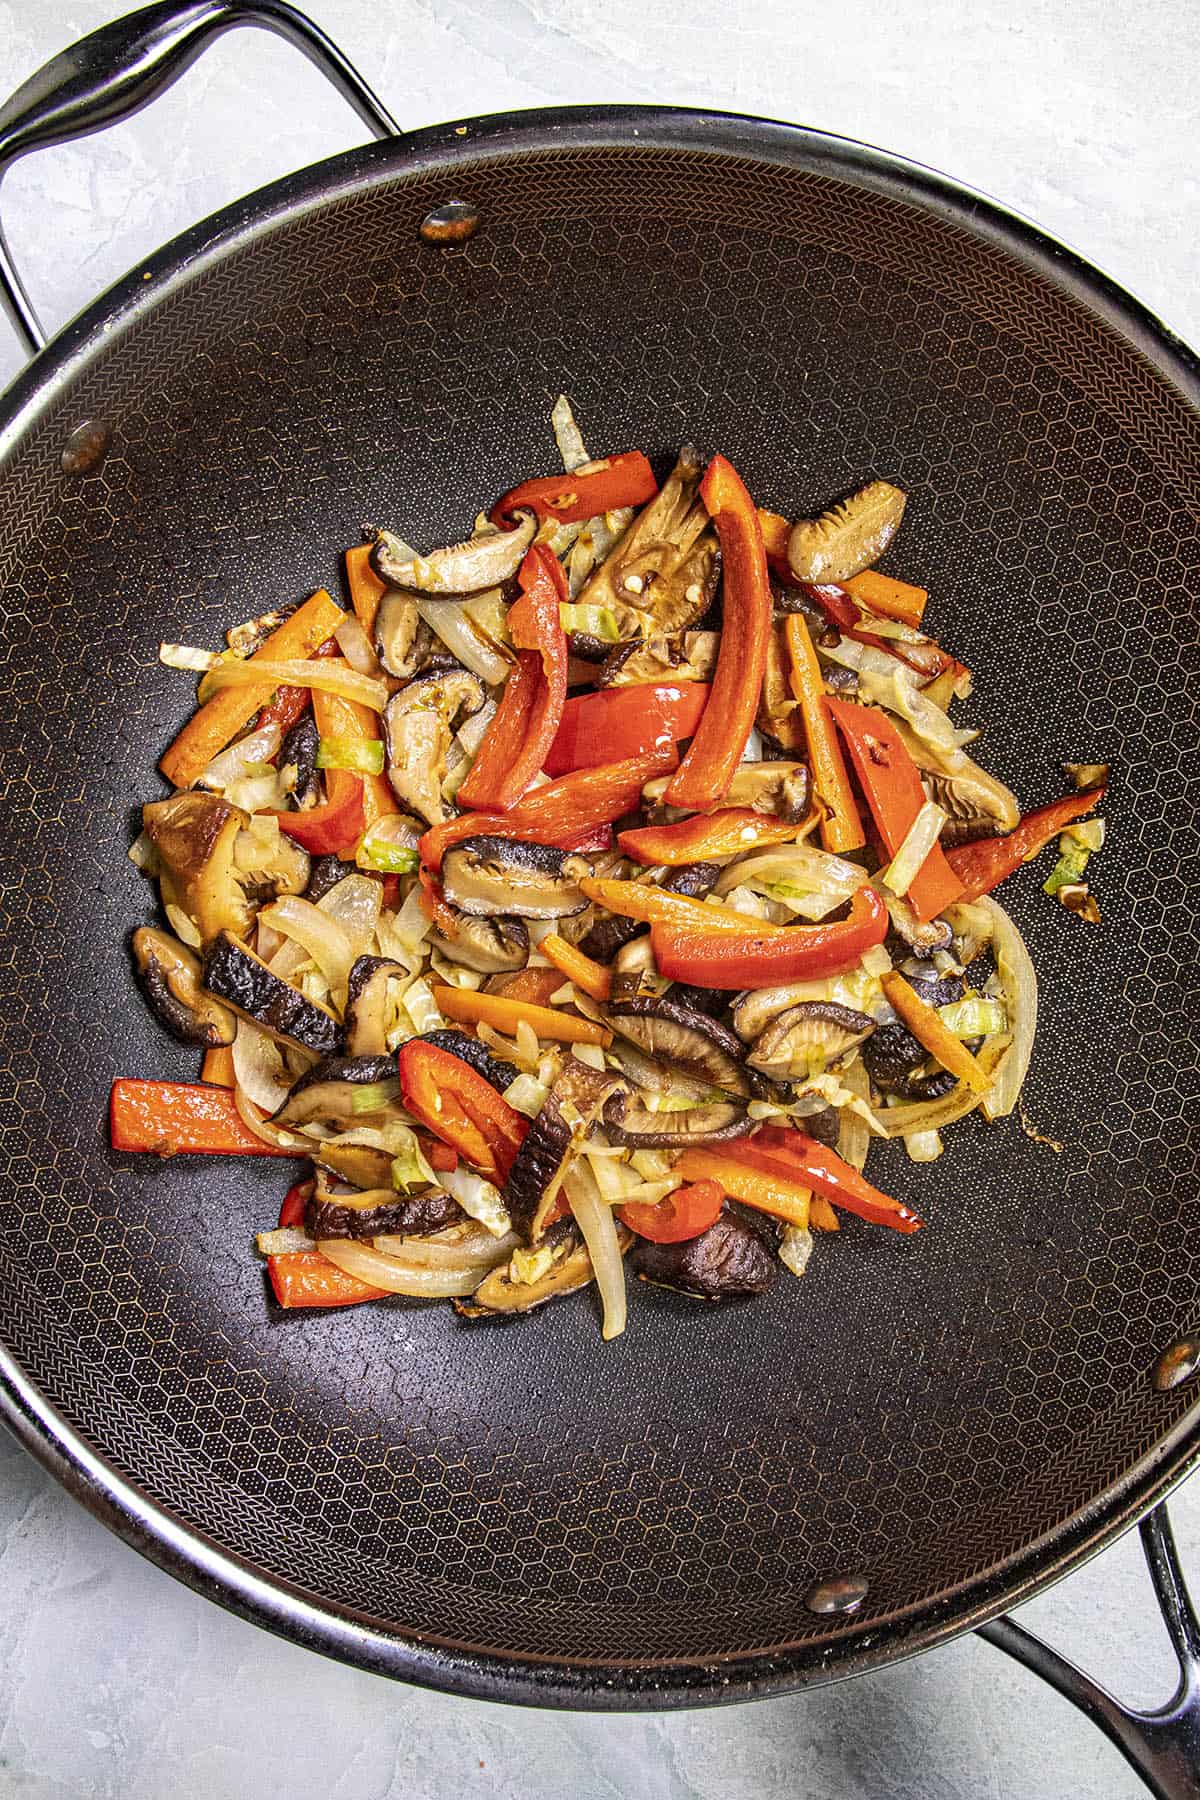 Stir frying vegetables in a wok to make Yaki Udon